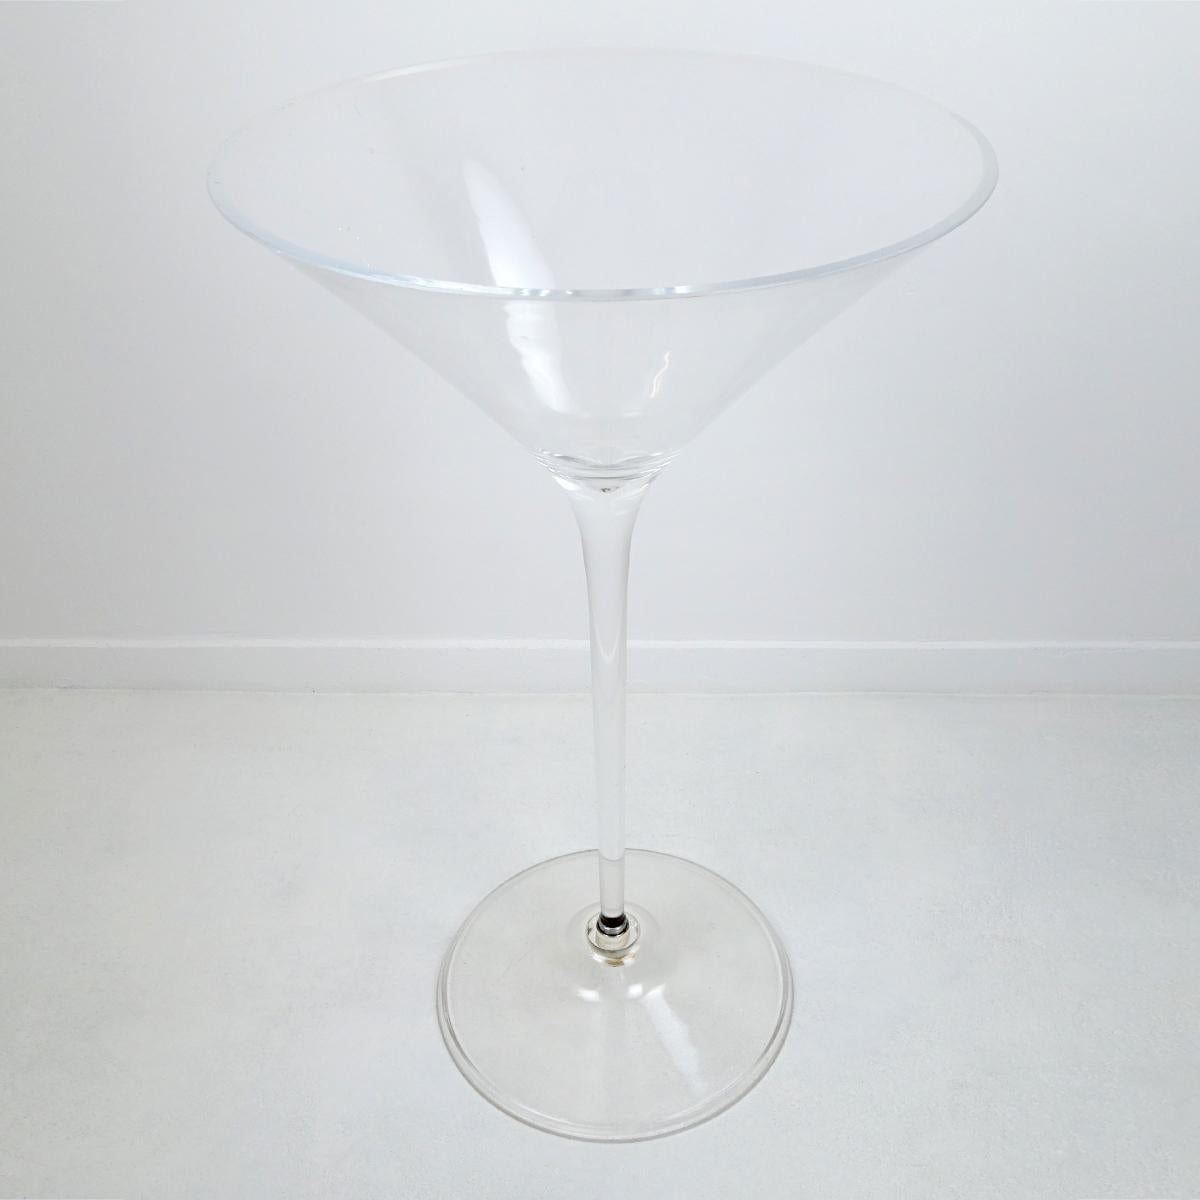 Never thirsty again!
With this enormous cocktail glass (98 cm / 38.59 inch high) in your buffet you will immediately catch all cheerful looks of the guests you are entertaining. 
It may serve as a conversation piece but may also be put to good use